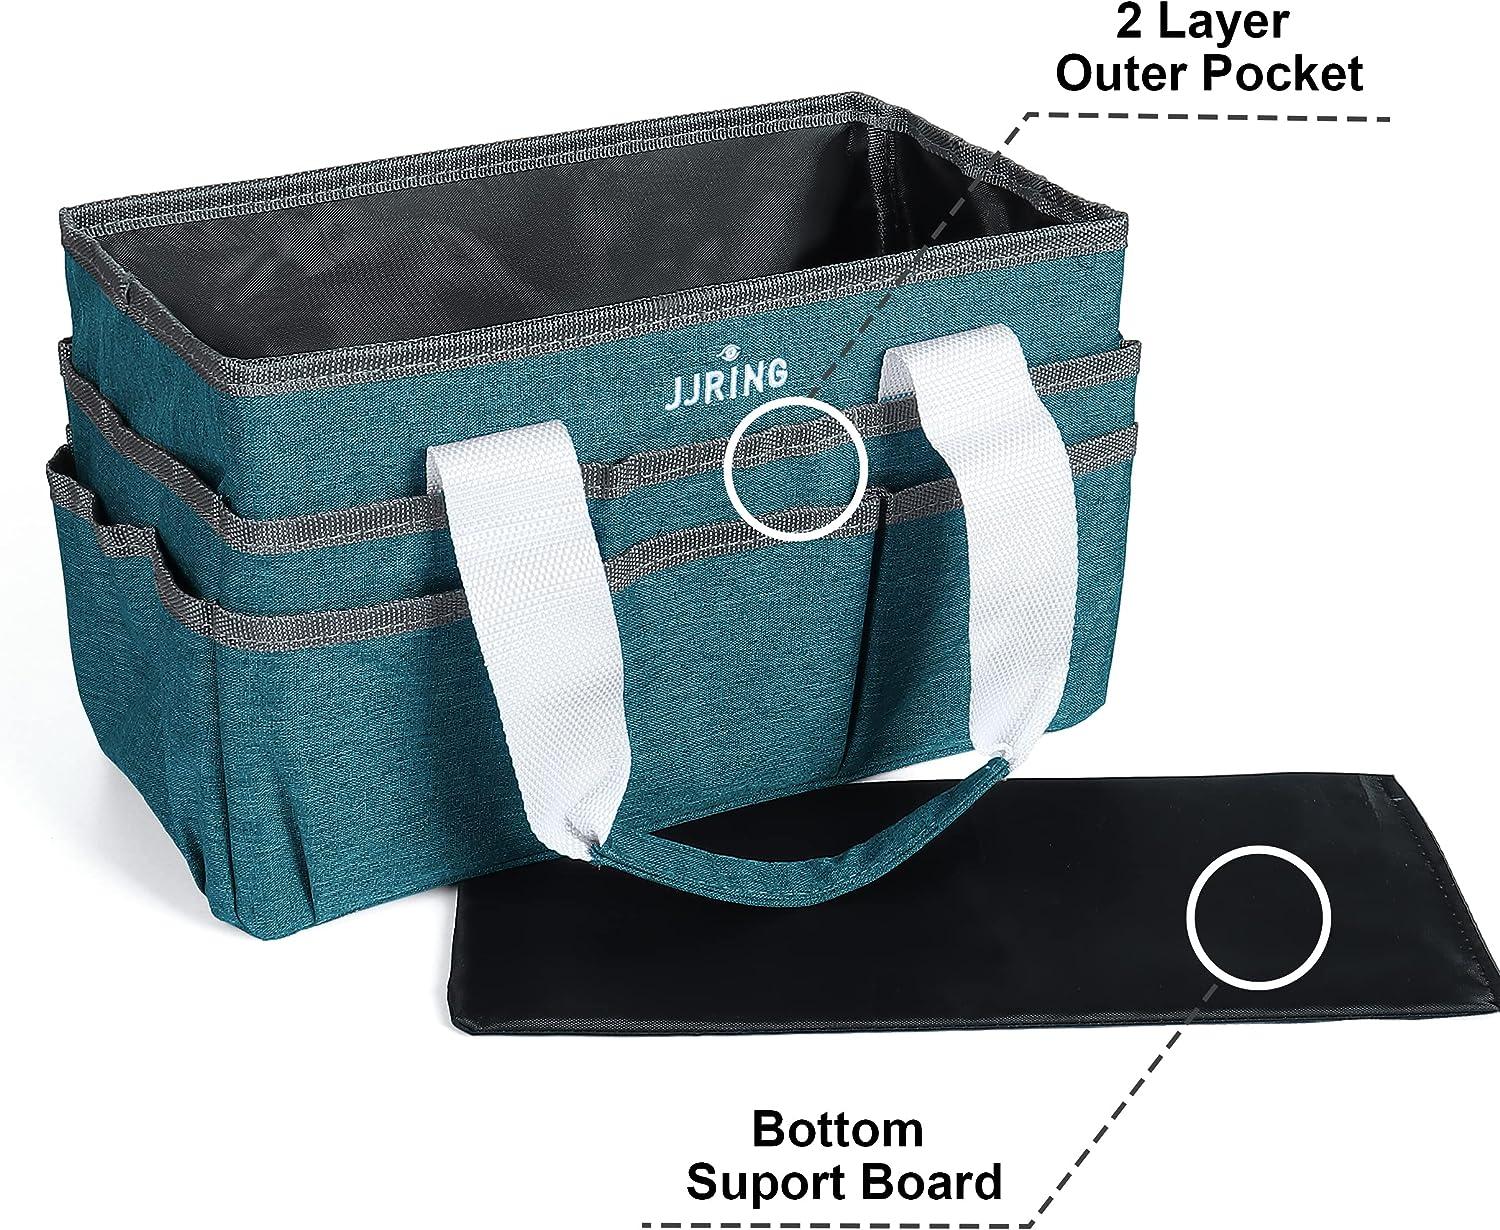 JJRING Craft and Art Organizer Tote Bag - 600D Green Nylon Fabric Art Caddy with Pockets - for Art, Craft, Sewing, Medical, and Office Supplies